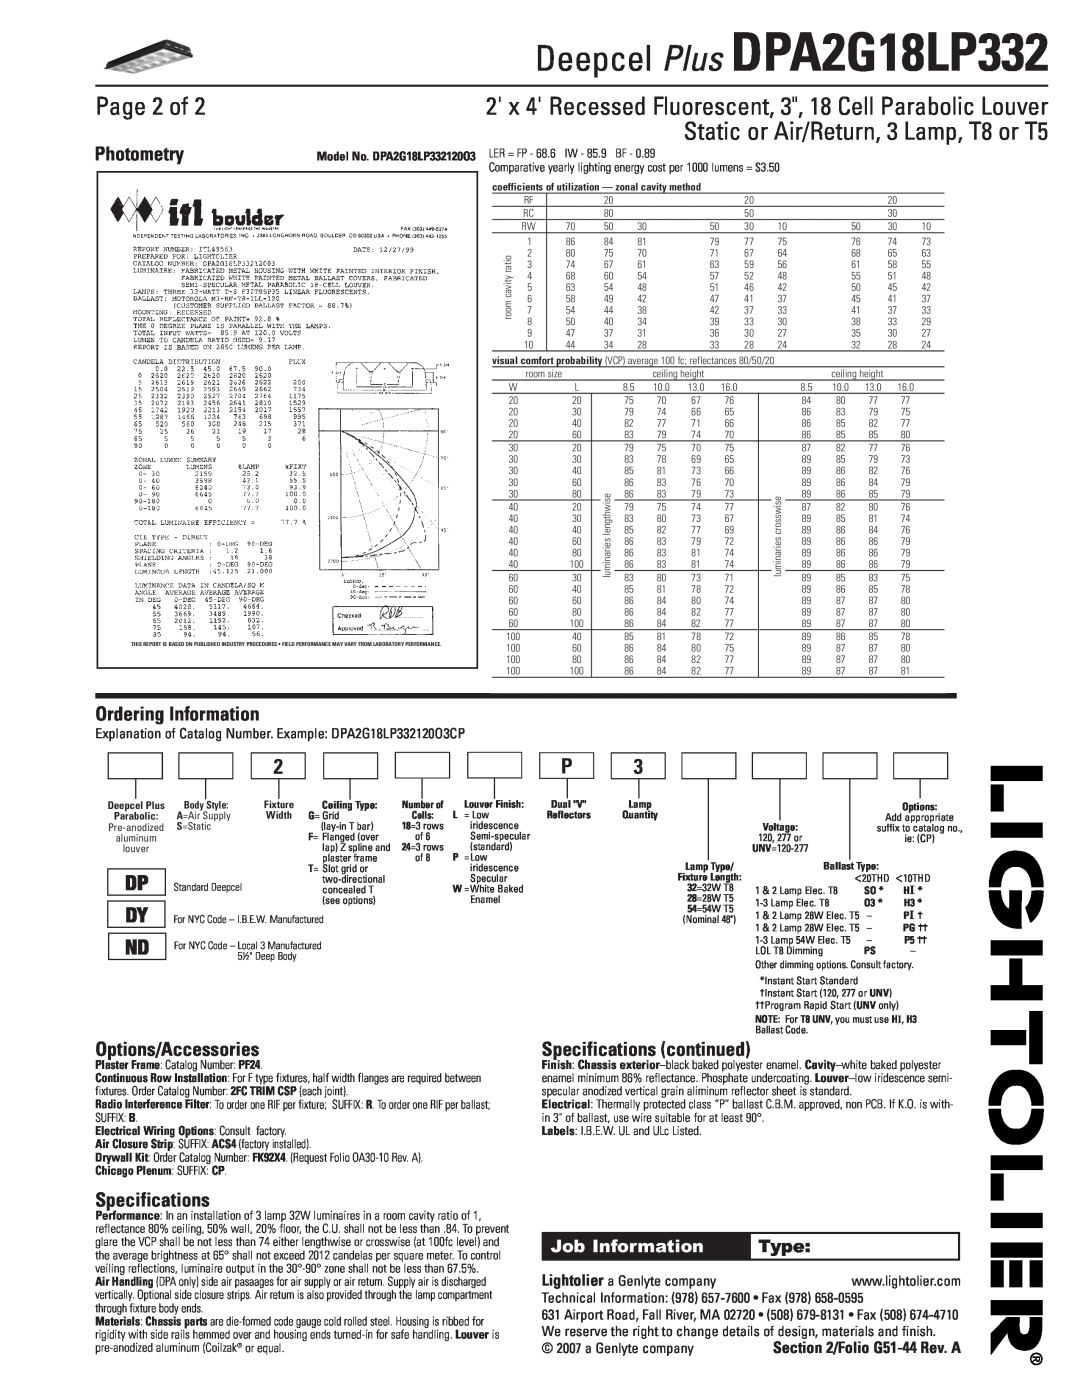 Lightolier DPA2G18LP332 Page 2 of, Photometry, Ordering Information, Options/Accessories, Specifications continued, Type 